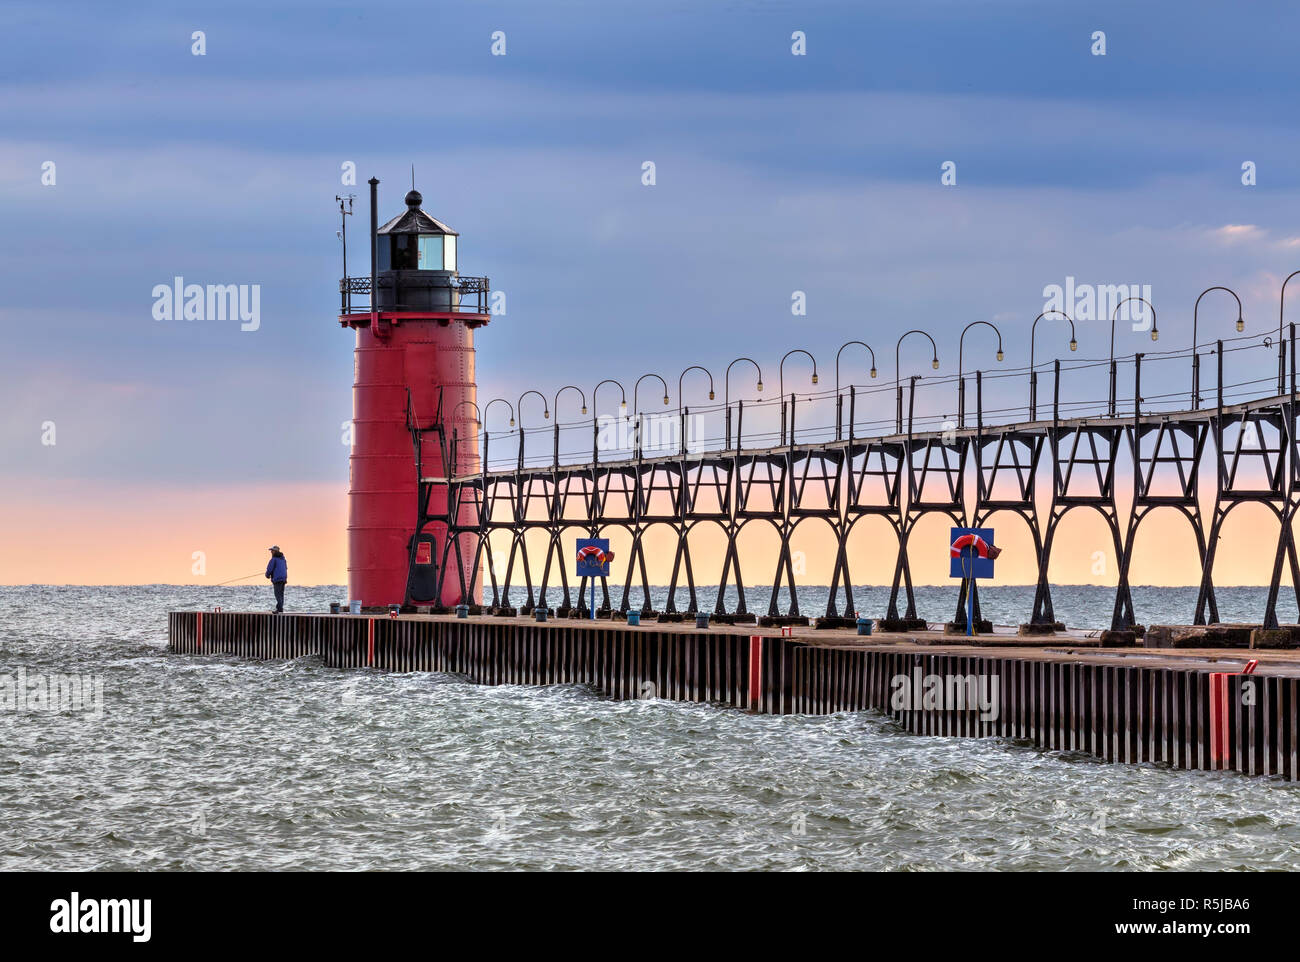 Evening skies begin to clear after a stormy afternoon at the South Haven, Michigan Lighthouse on Lake Michigan. Stock Photo